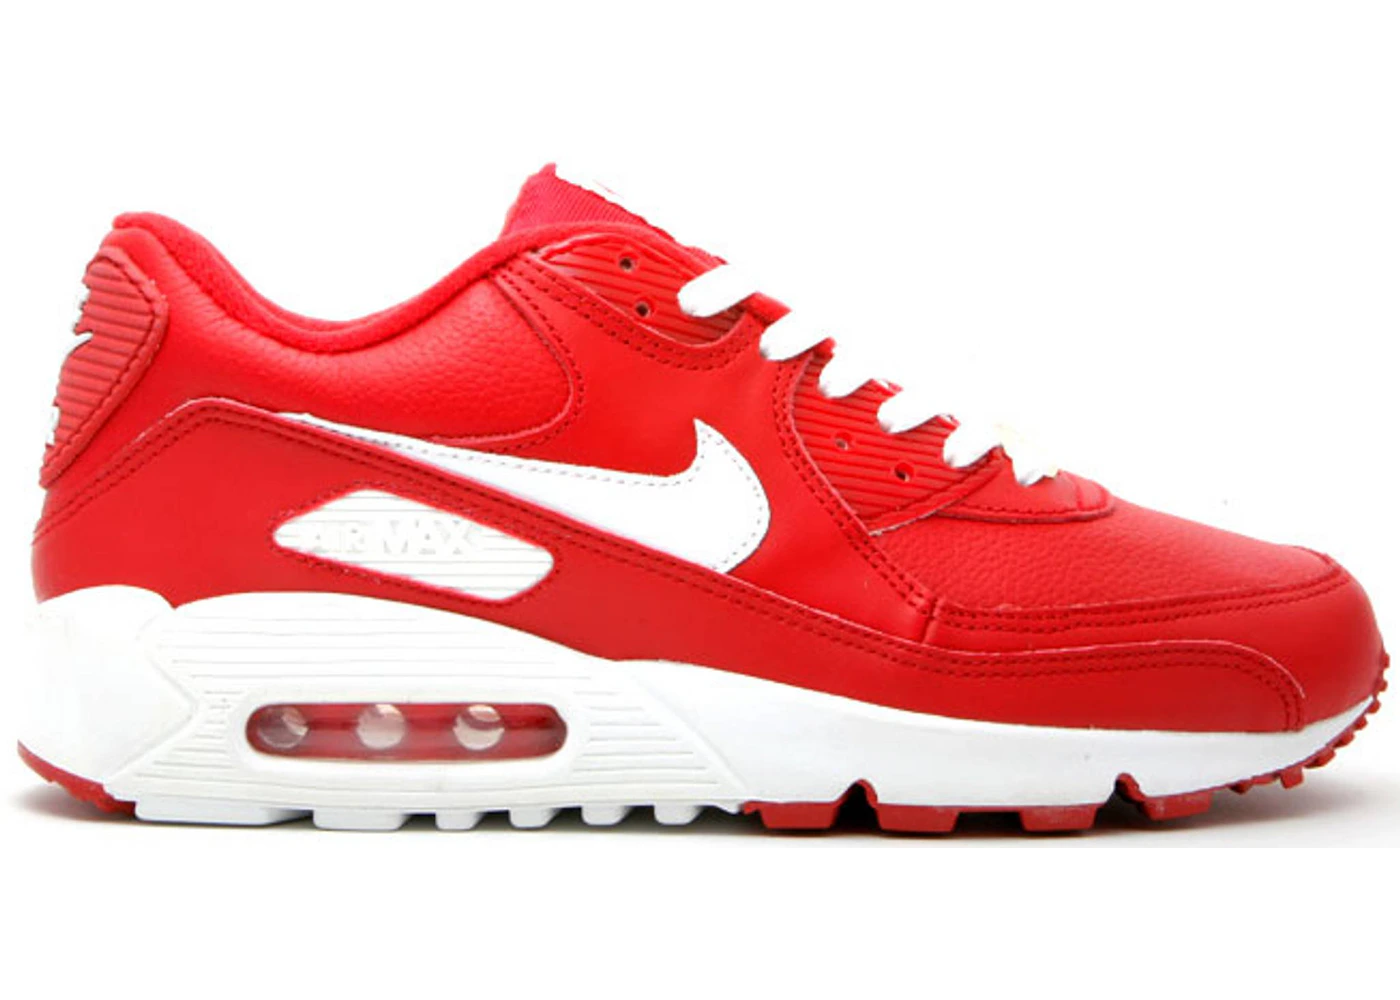 Nike Air Max 90 Leather Valentine's Day (2003) (Women's) - 302584-611 - US